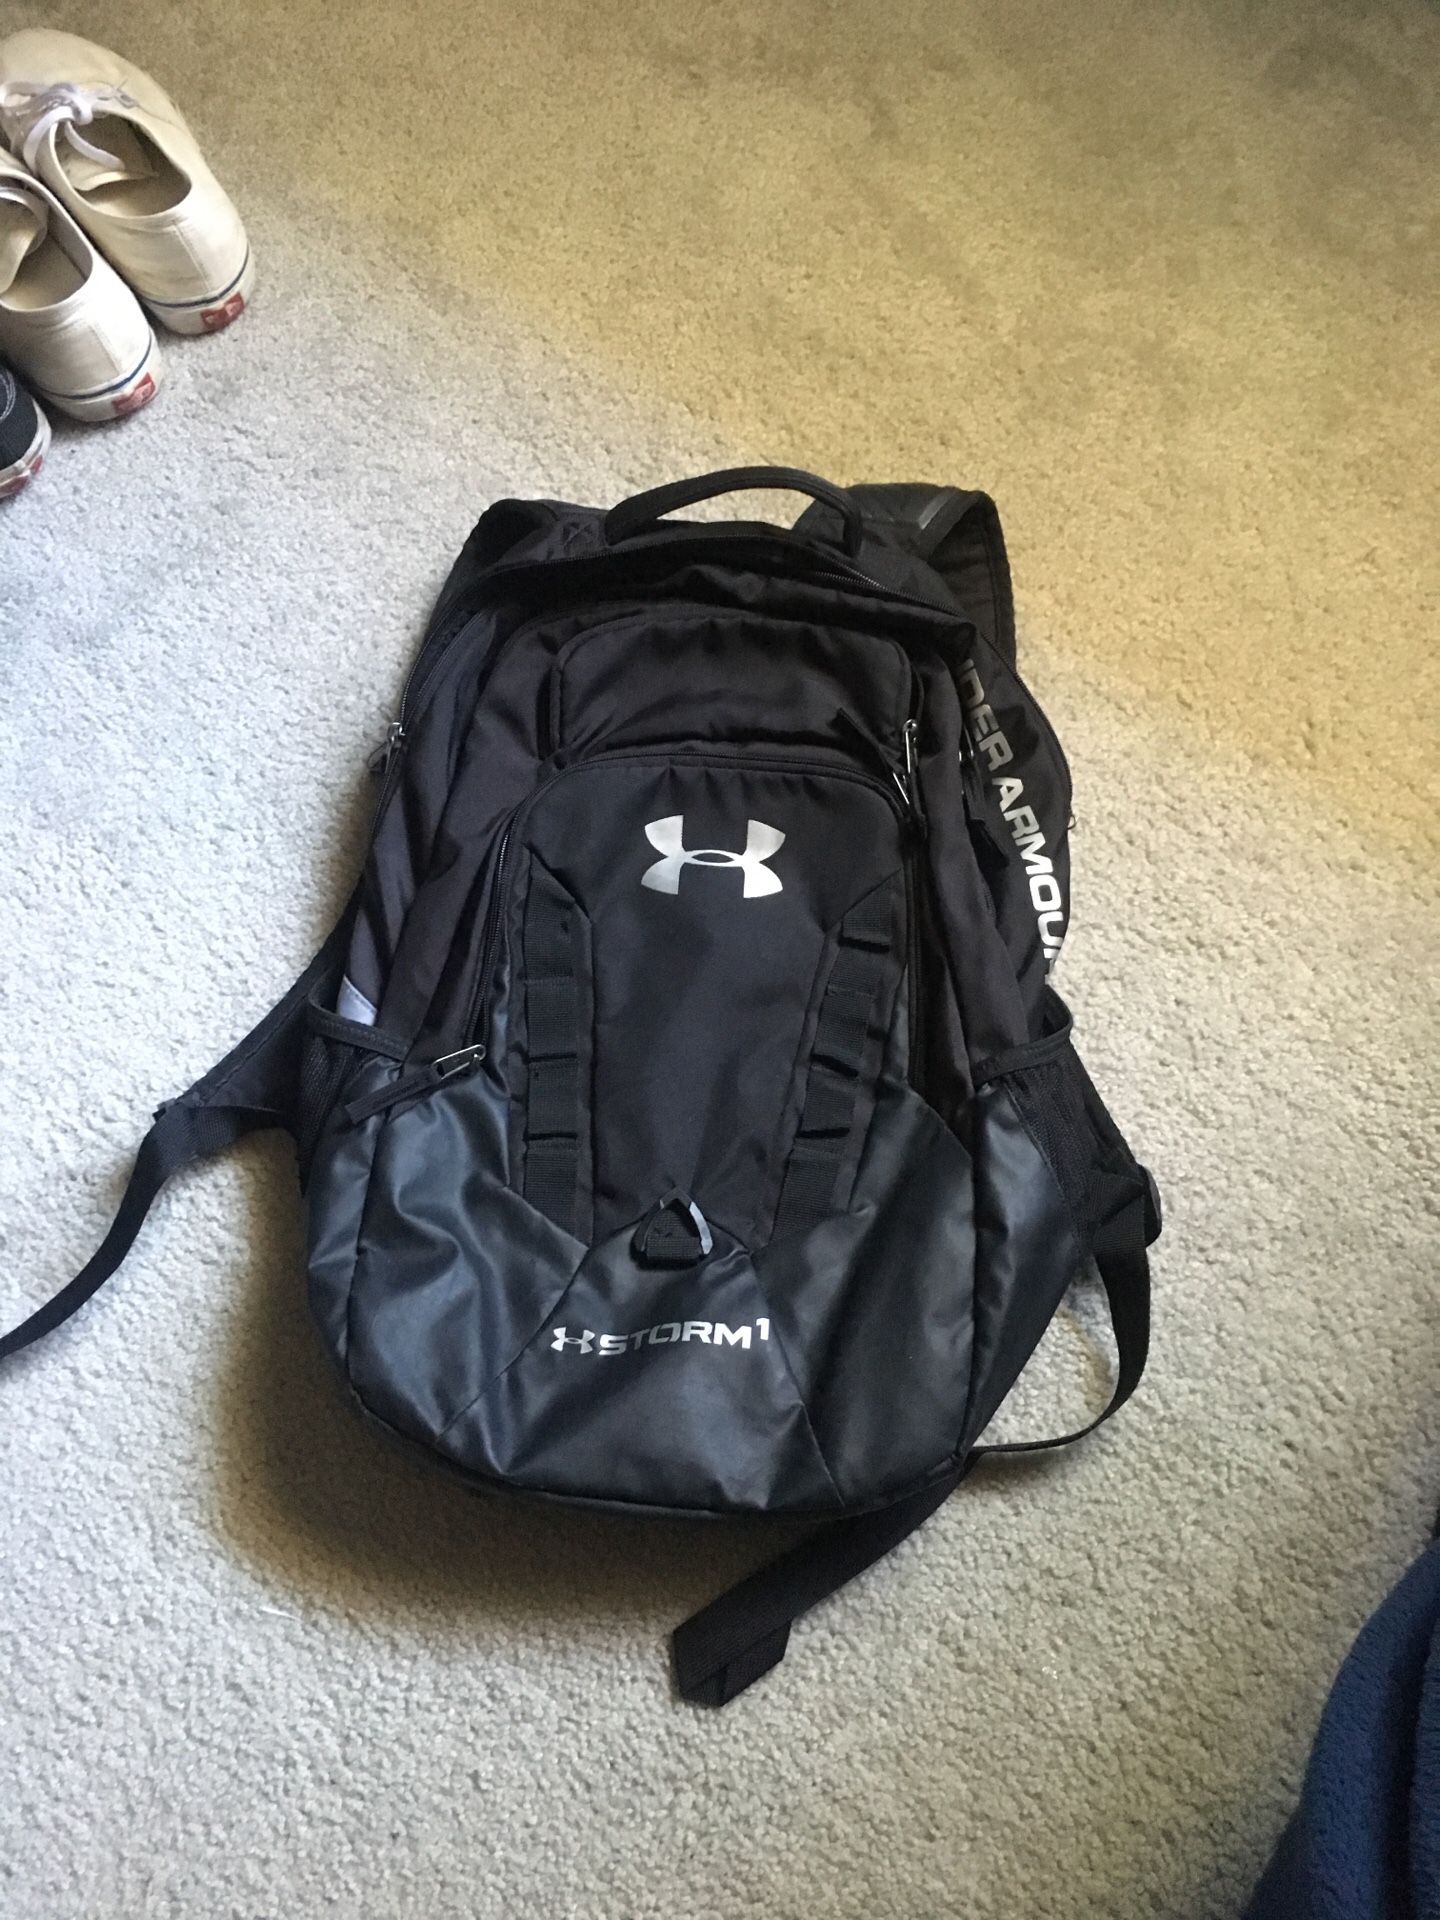 Underarmour backpack